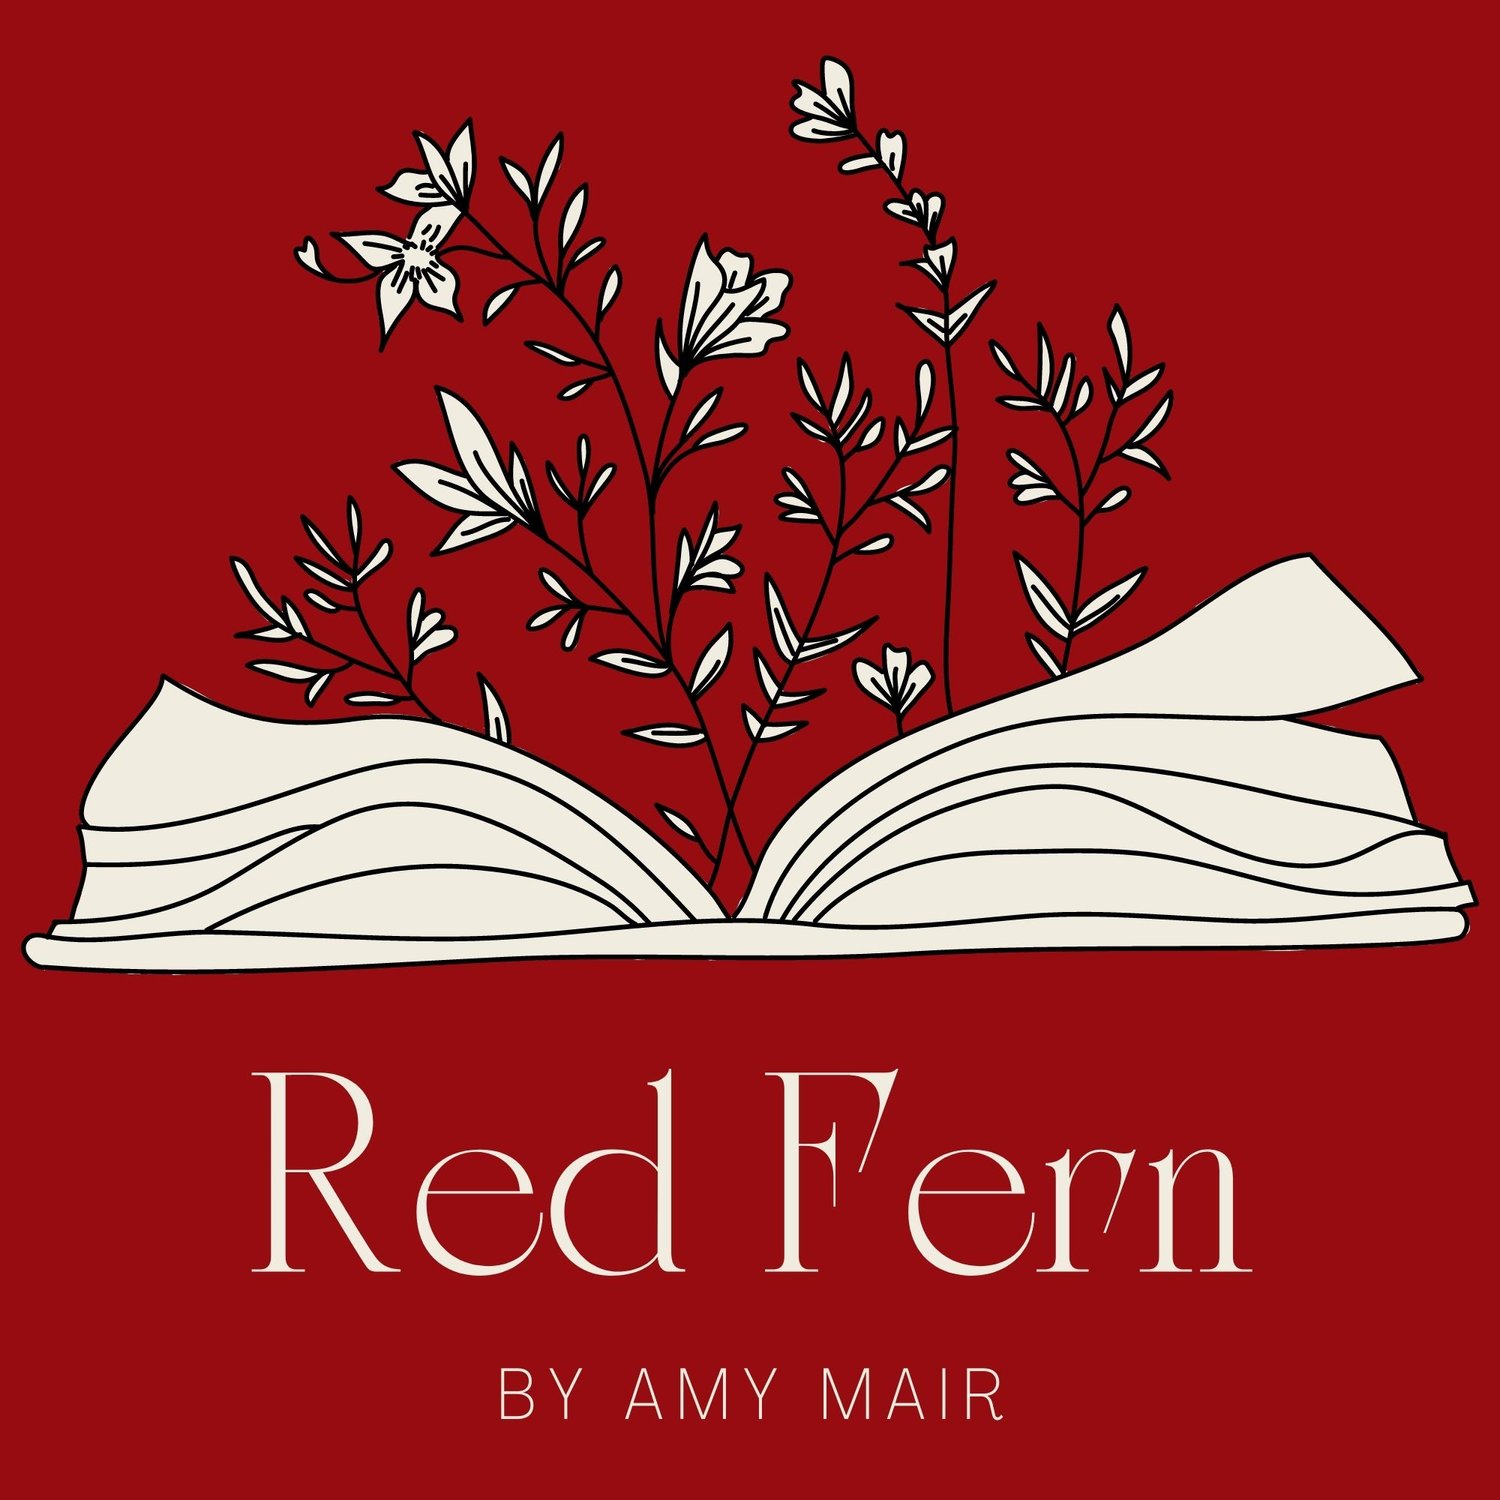 Red Fern by Amy Mair